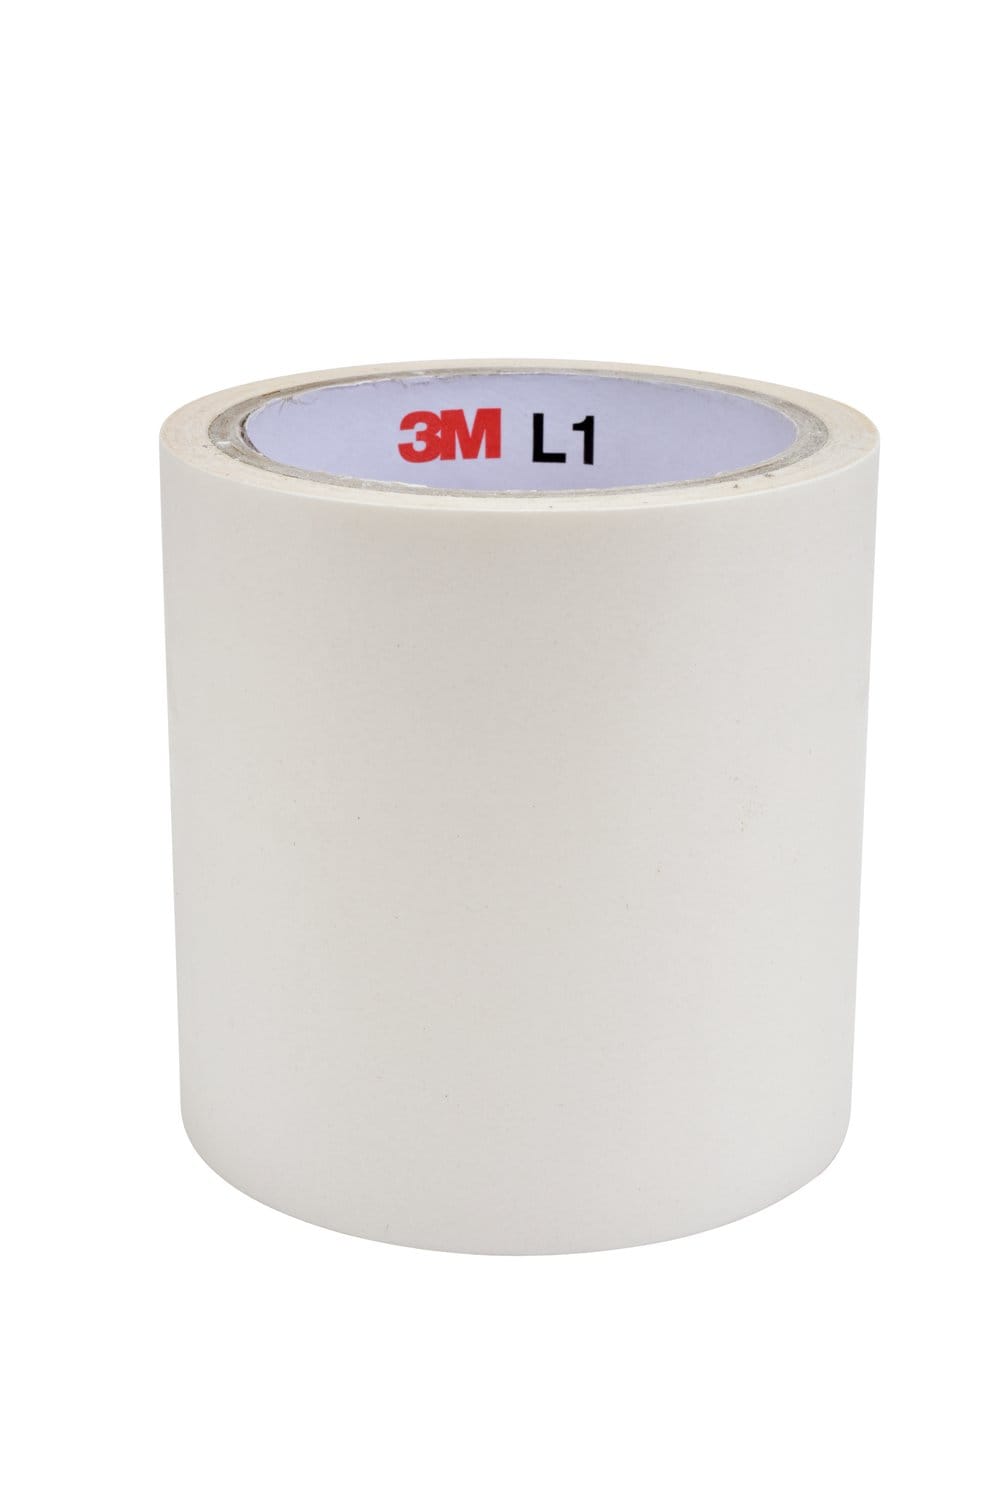 7100089787 - 3M Double Coated Adhesive Tape L1+DCP, Clear, 1000 mm x 230 m, 0.09 mm,
6 rolls per pallet